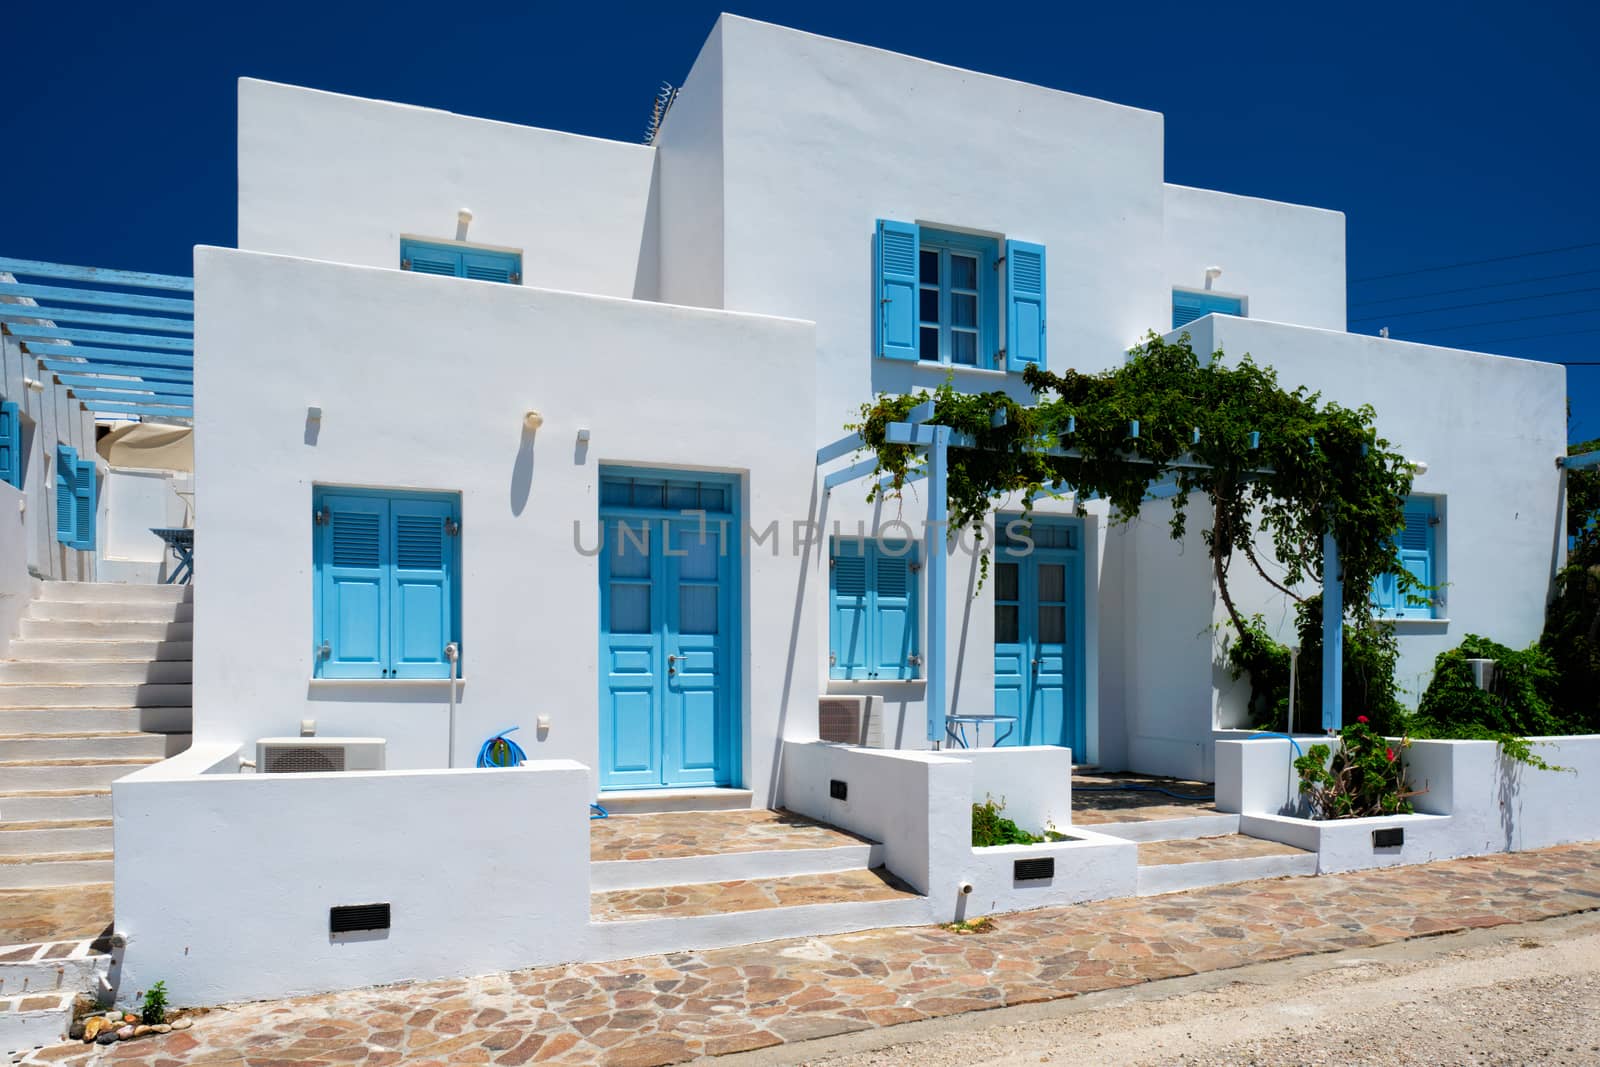 Traditional greek architecture houses painted white with blue doors and window shutters by dimol